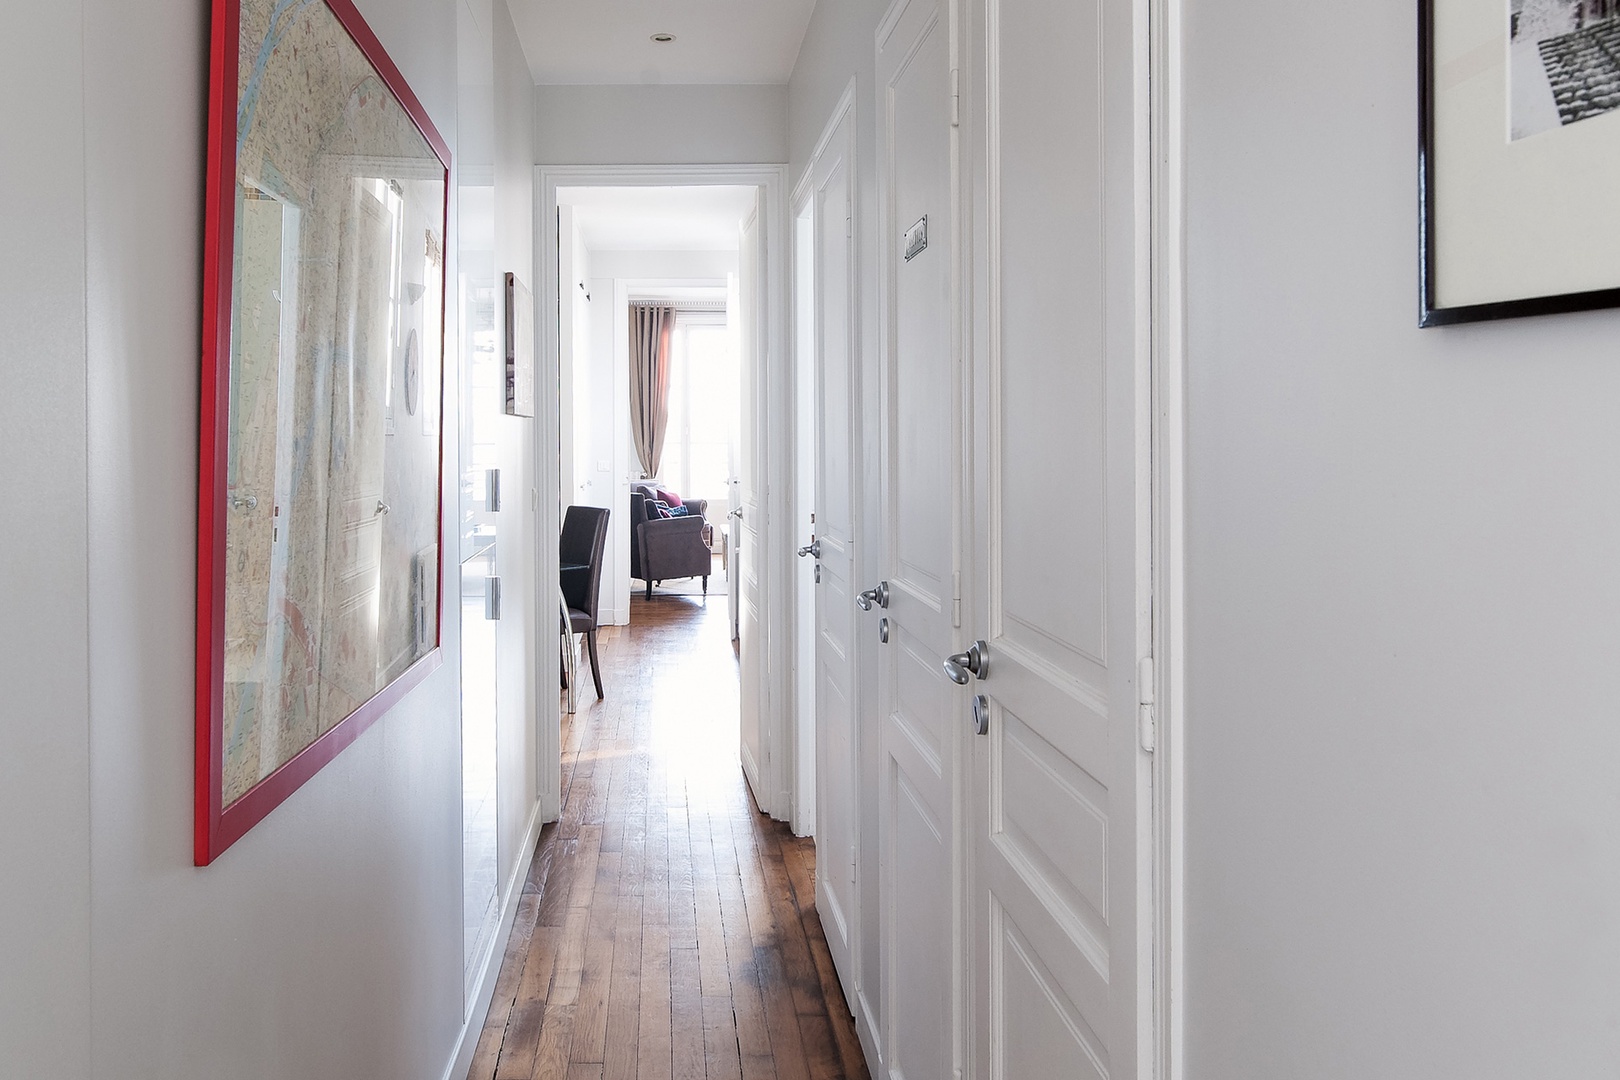 Hallway leading to bedrooms and bathrooms